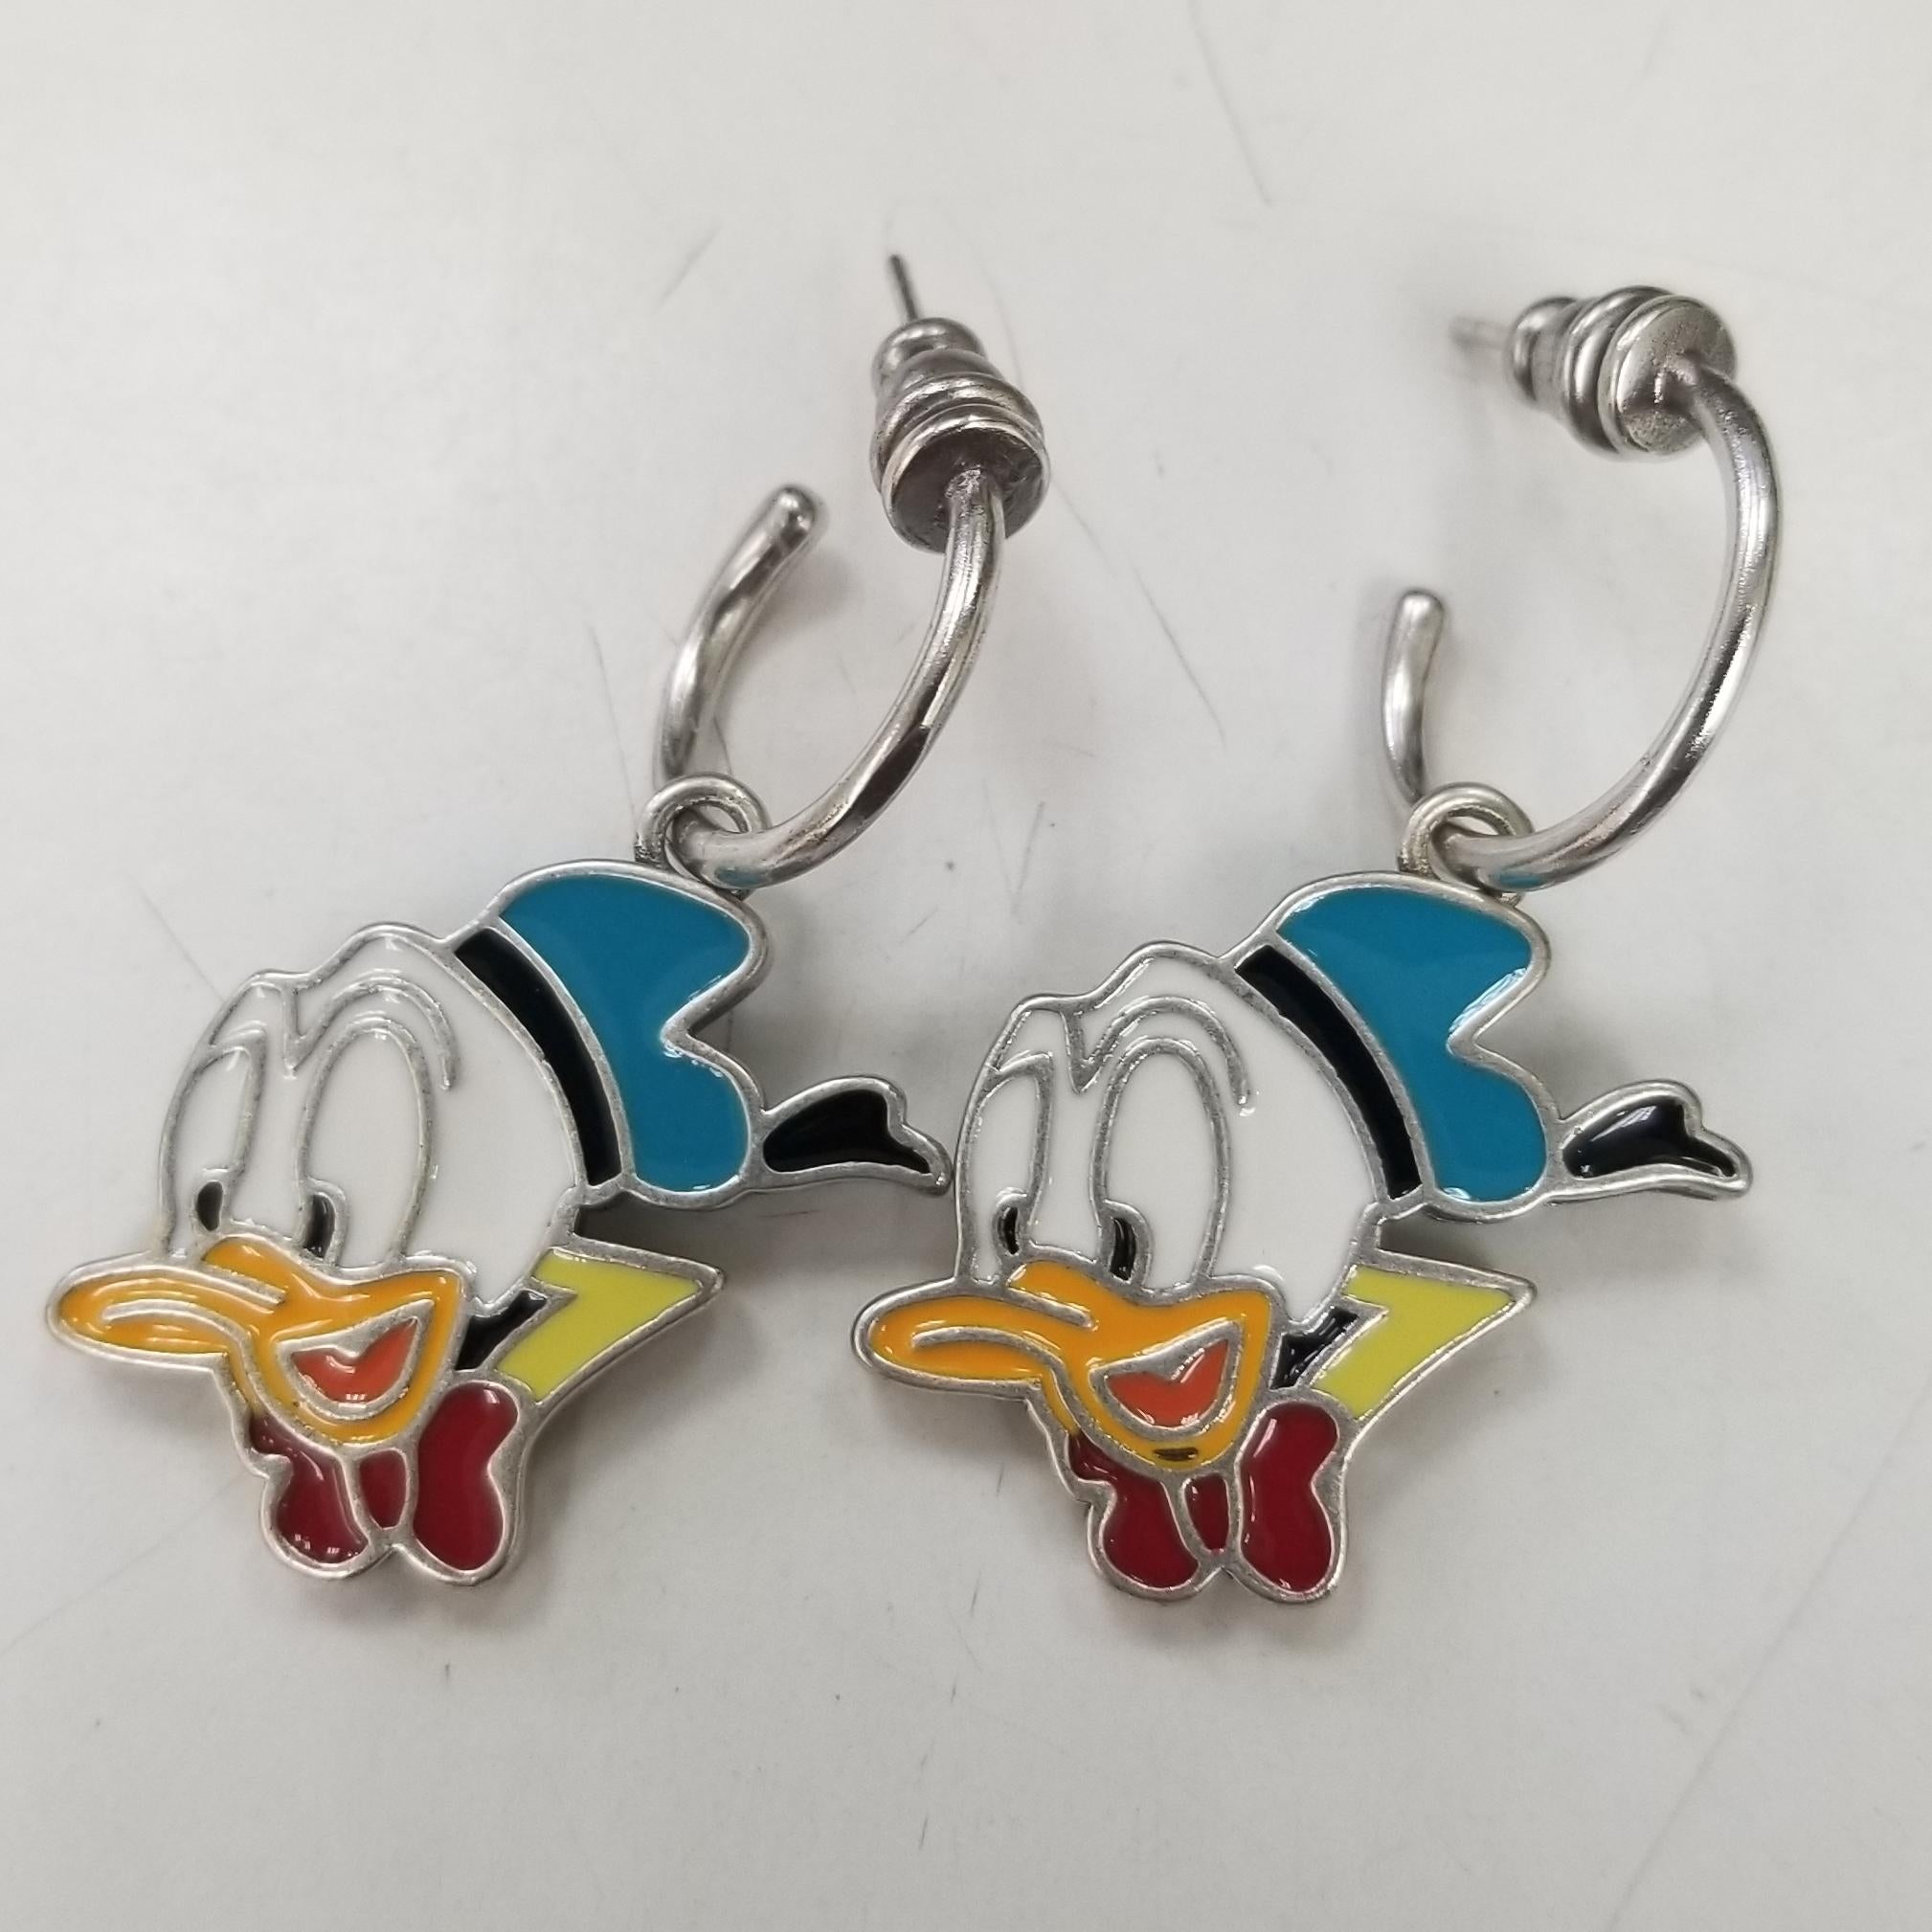 Description

Imbued with a playful spirit, legendary Disney characters continue to enrich the House's narrative. Donald Duck adds a whimsical feel to signature shapes and designs. Here, he appears as a colorful enameled detail atop a silver bracelet